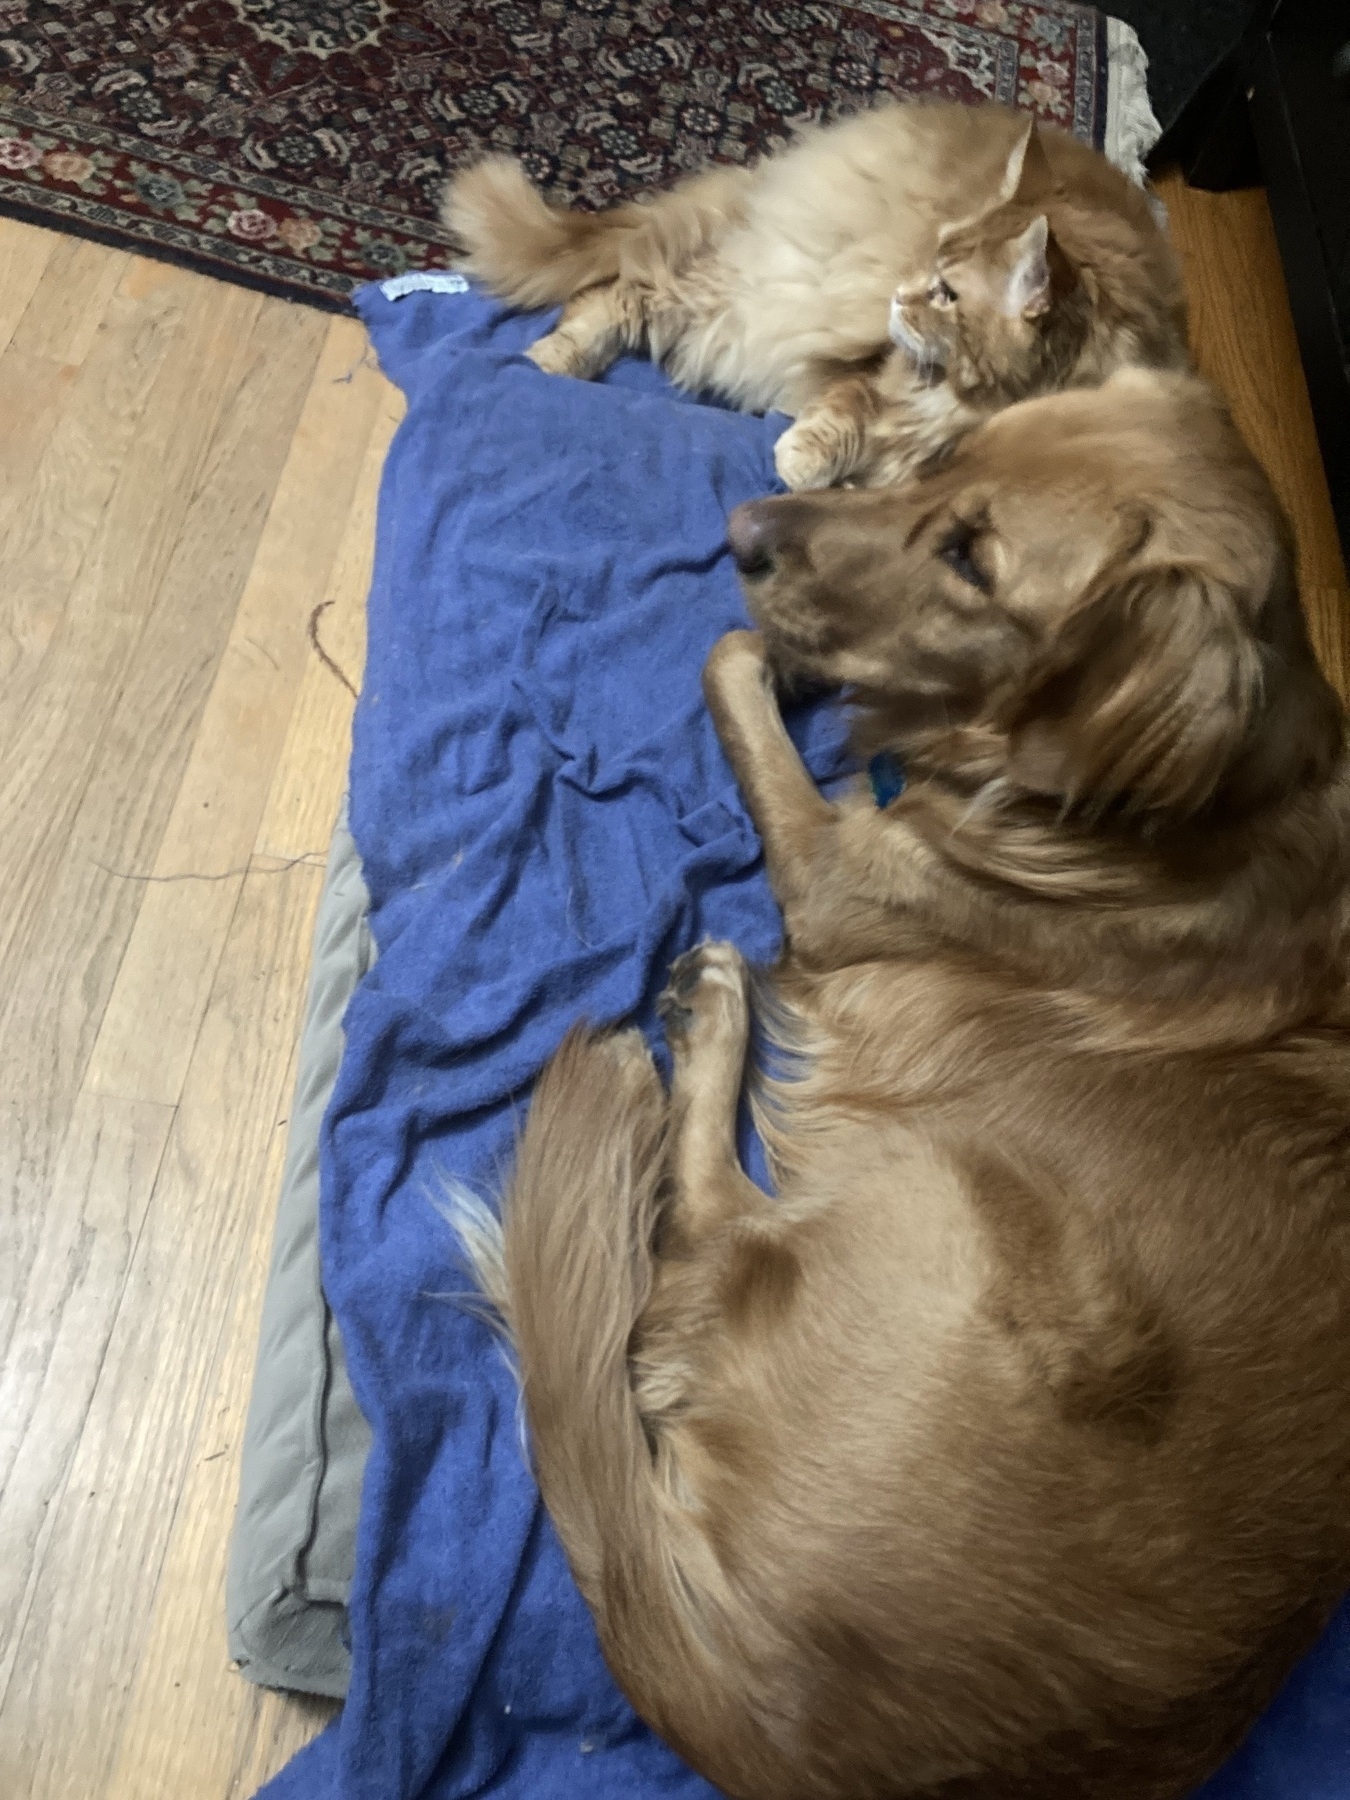 A golden retriever and a large orange Maine Coon cat lie on the same bed, looking intently at someone off to the left.